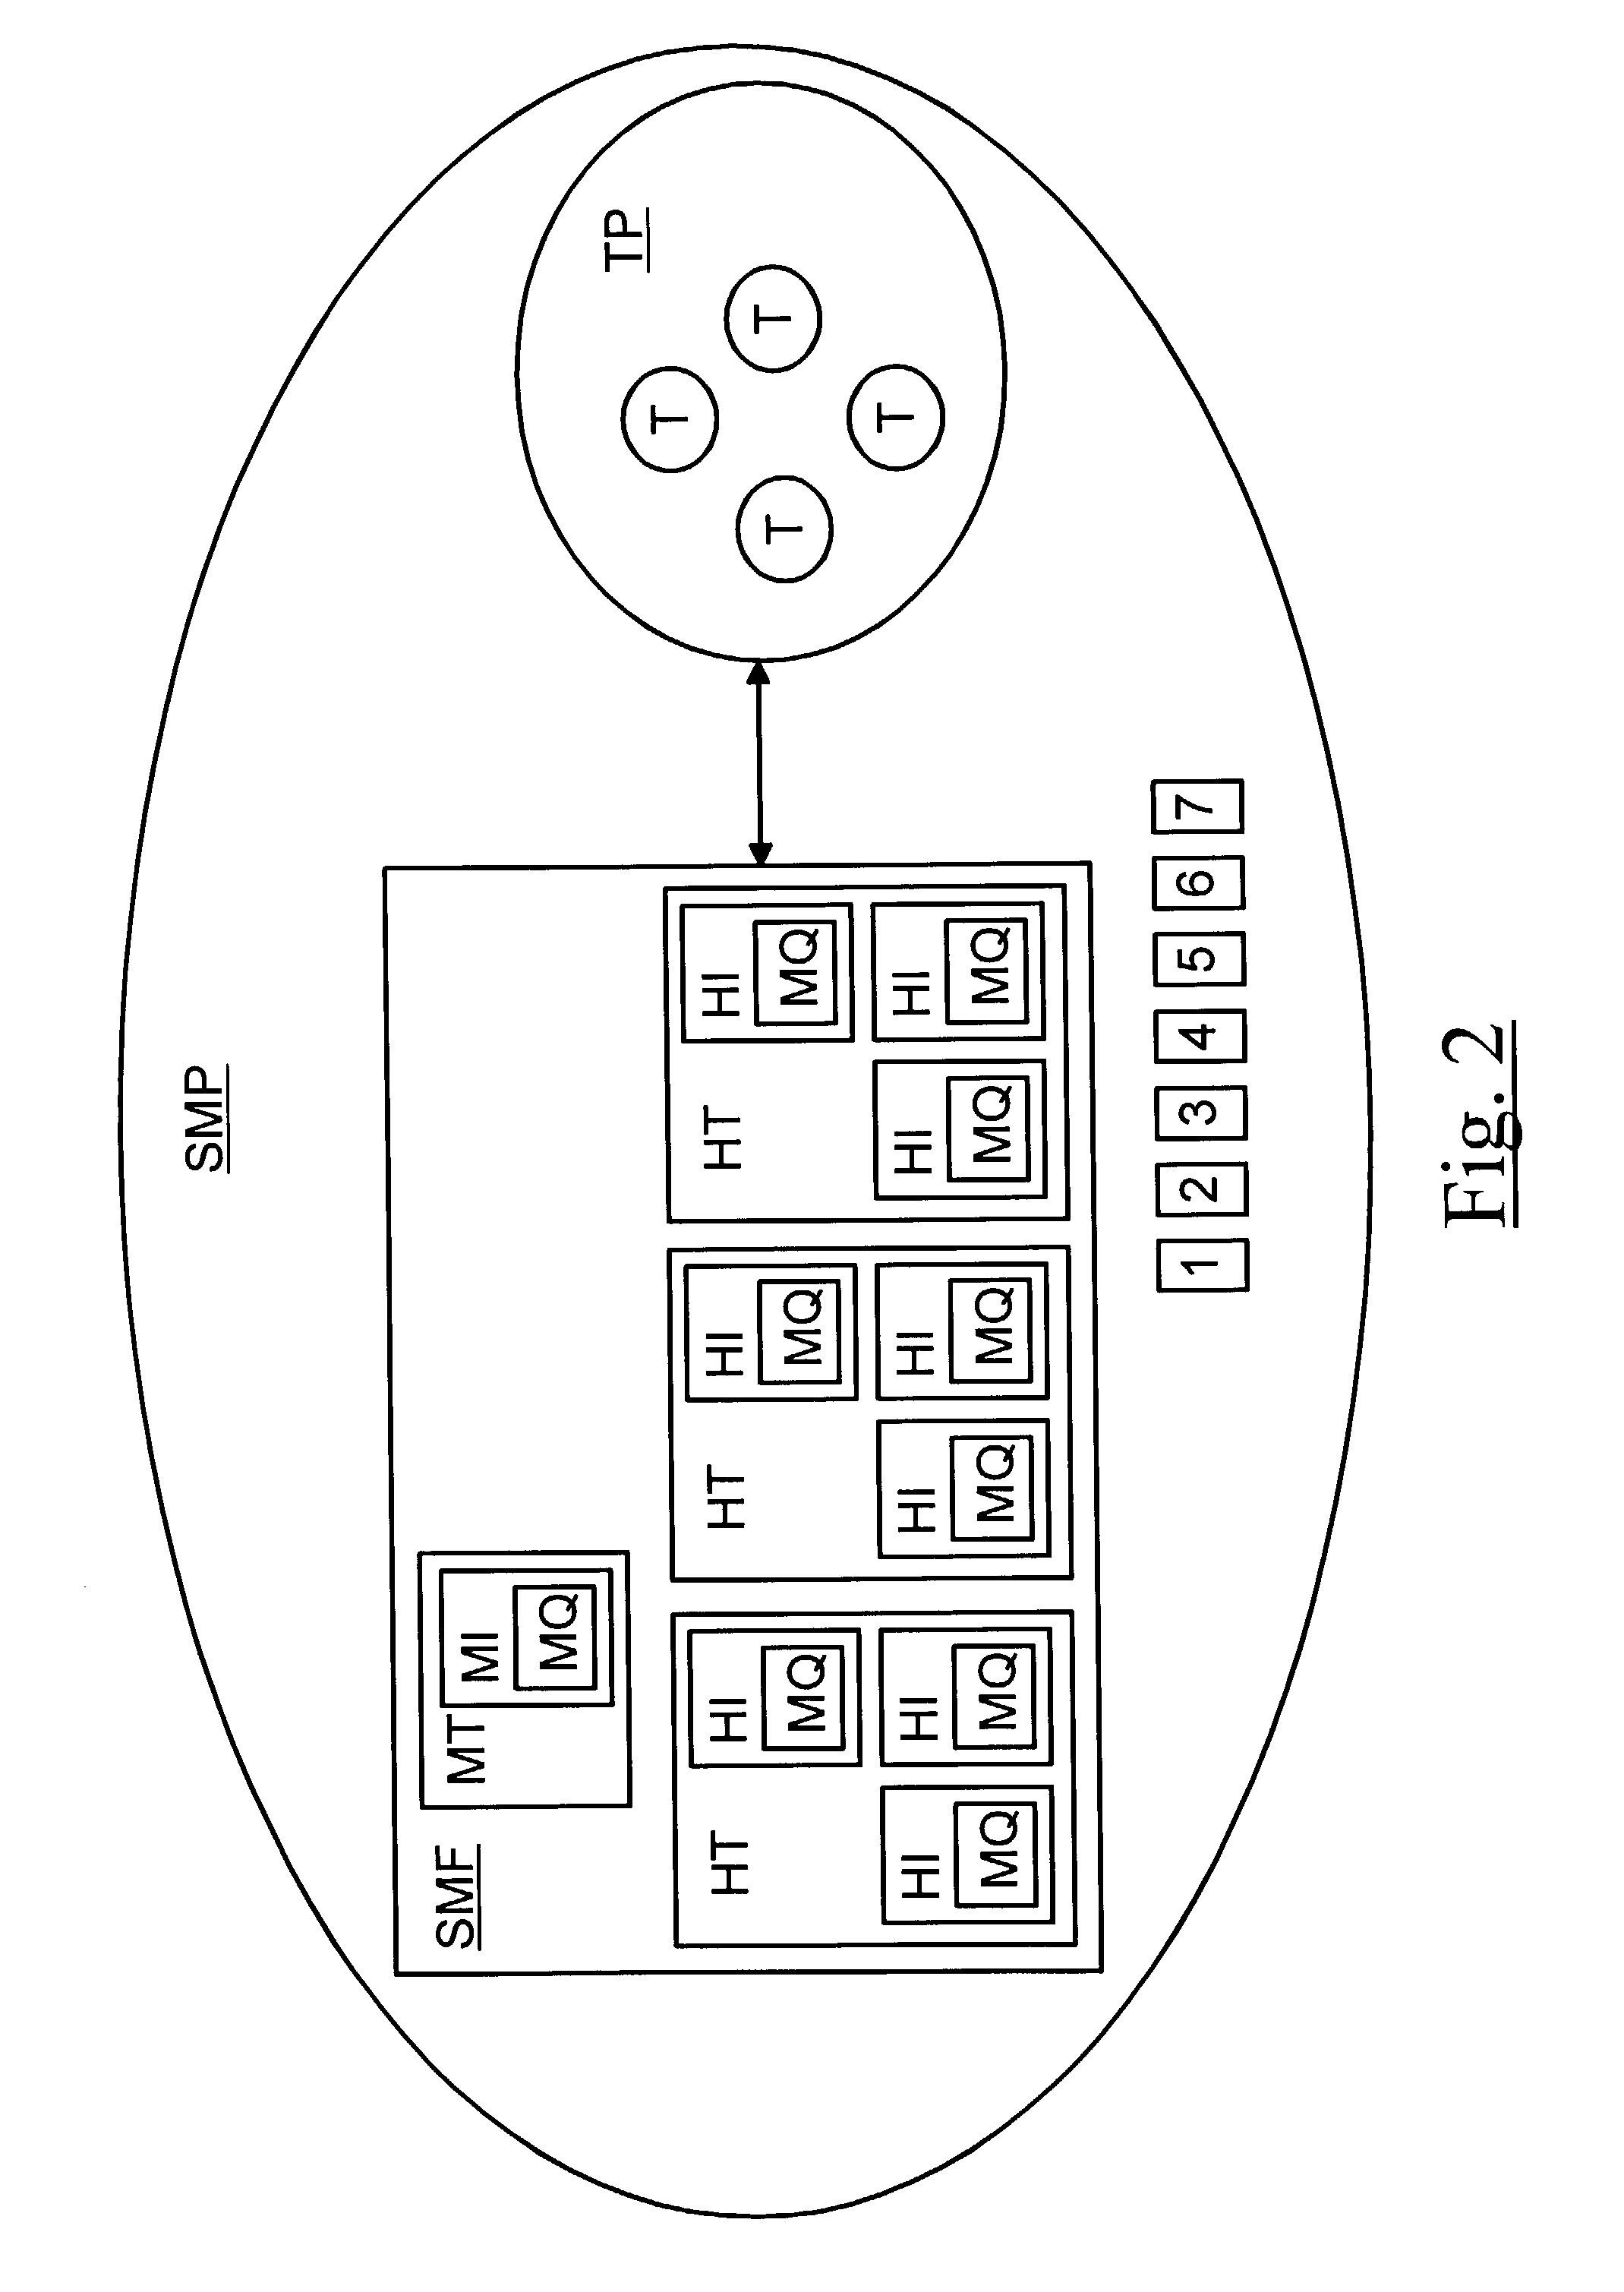 Concurrent operation of a state machine family